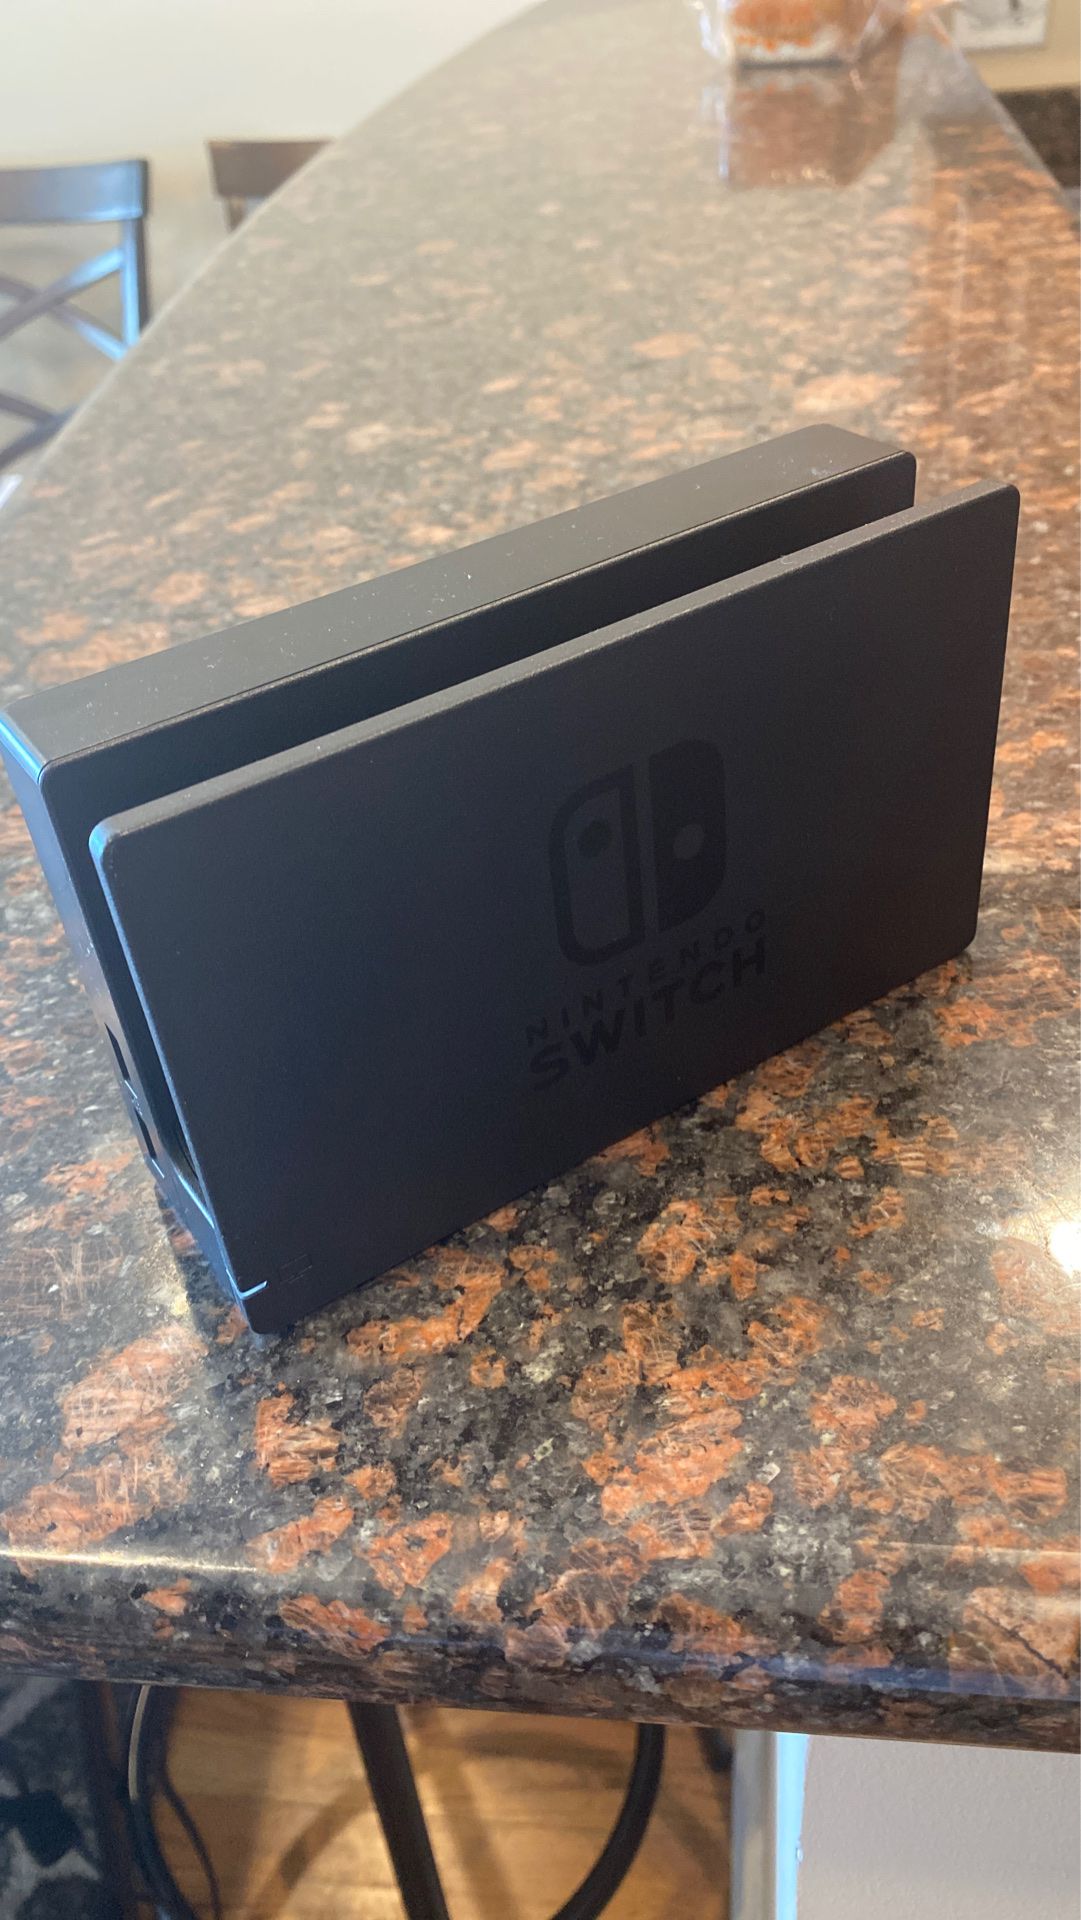 Nintendo Switch Dock Only